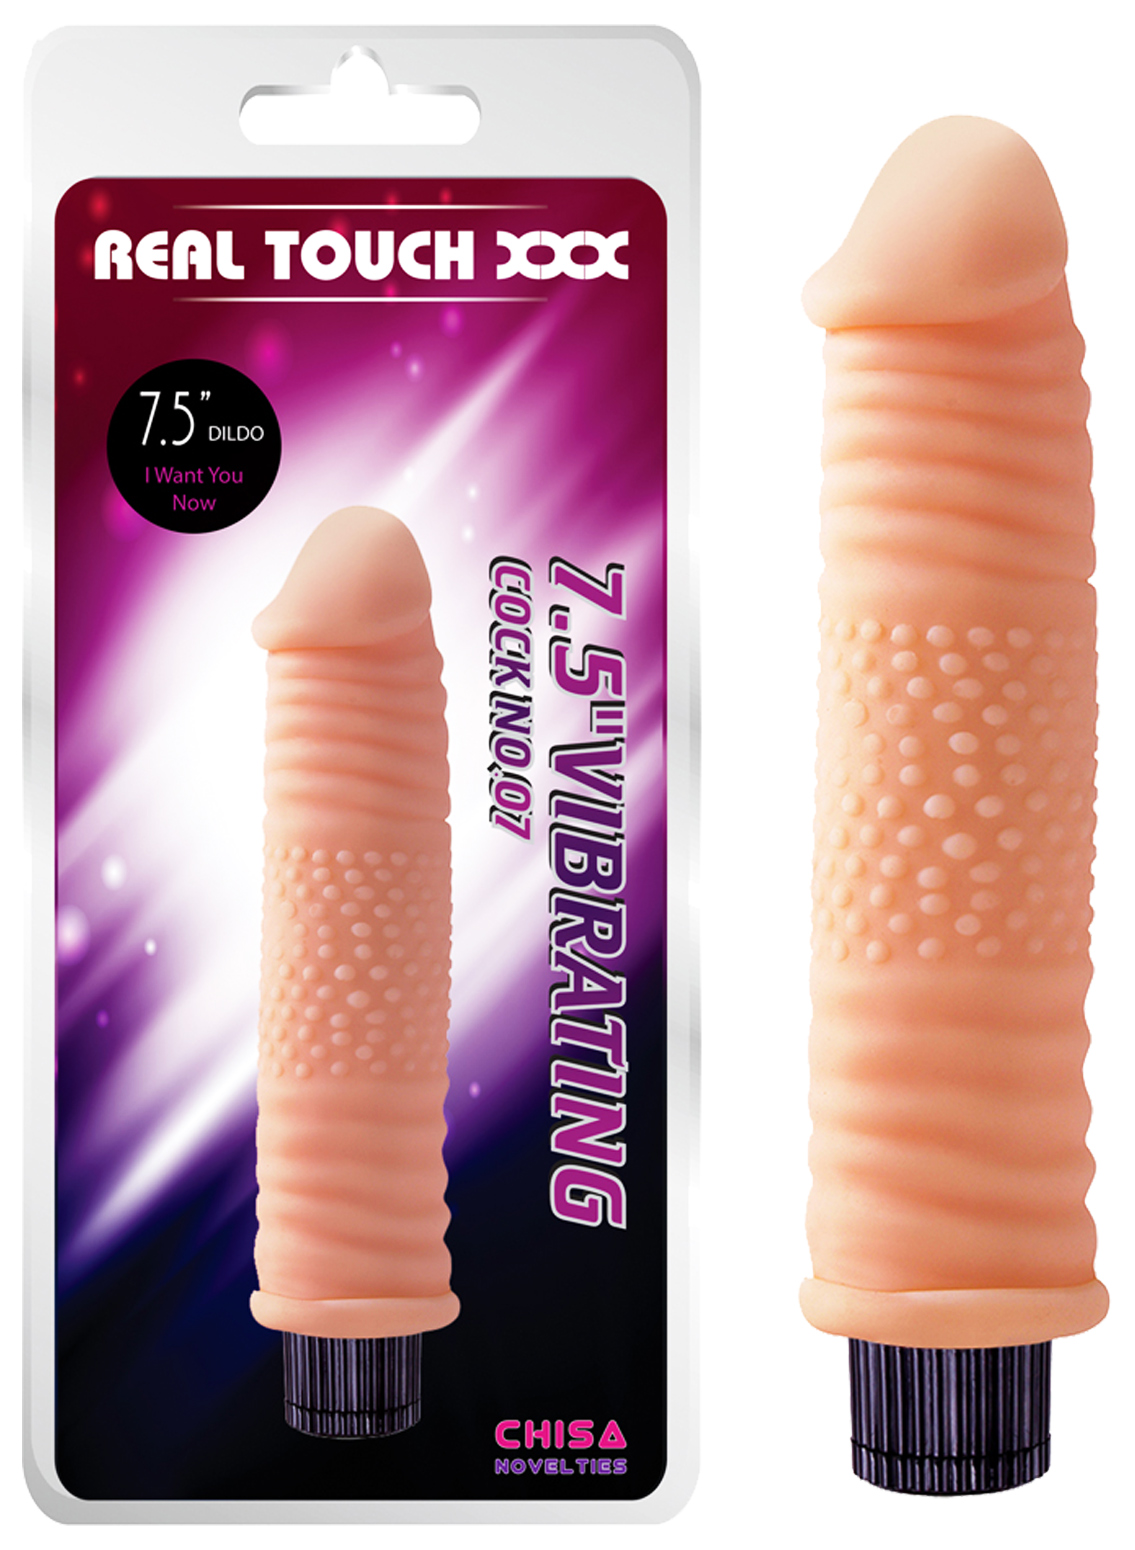 Chisa Novelties Real Touch XXX 7,5" Vibrating Cock No.07